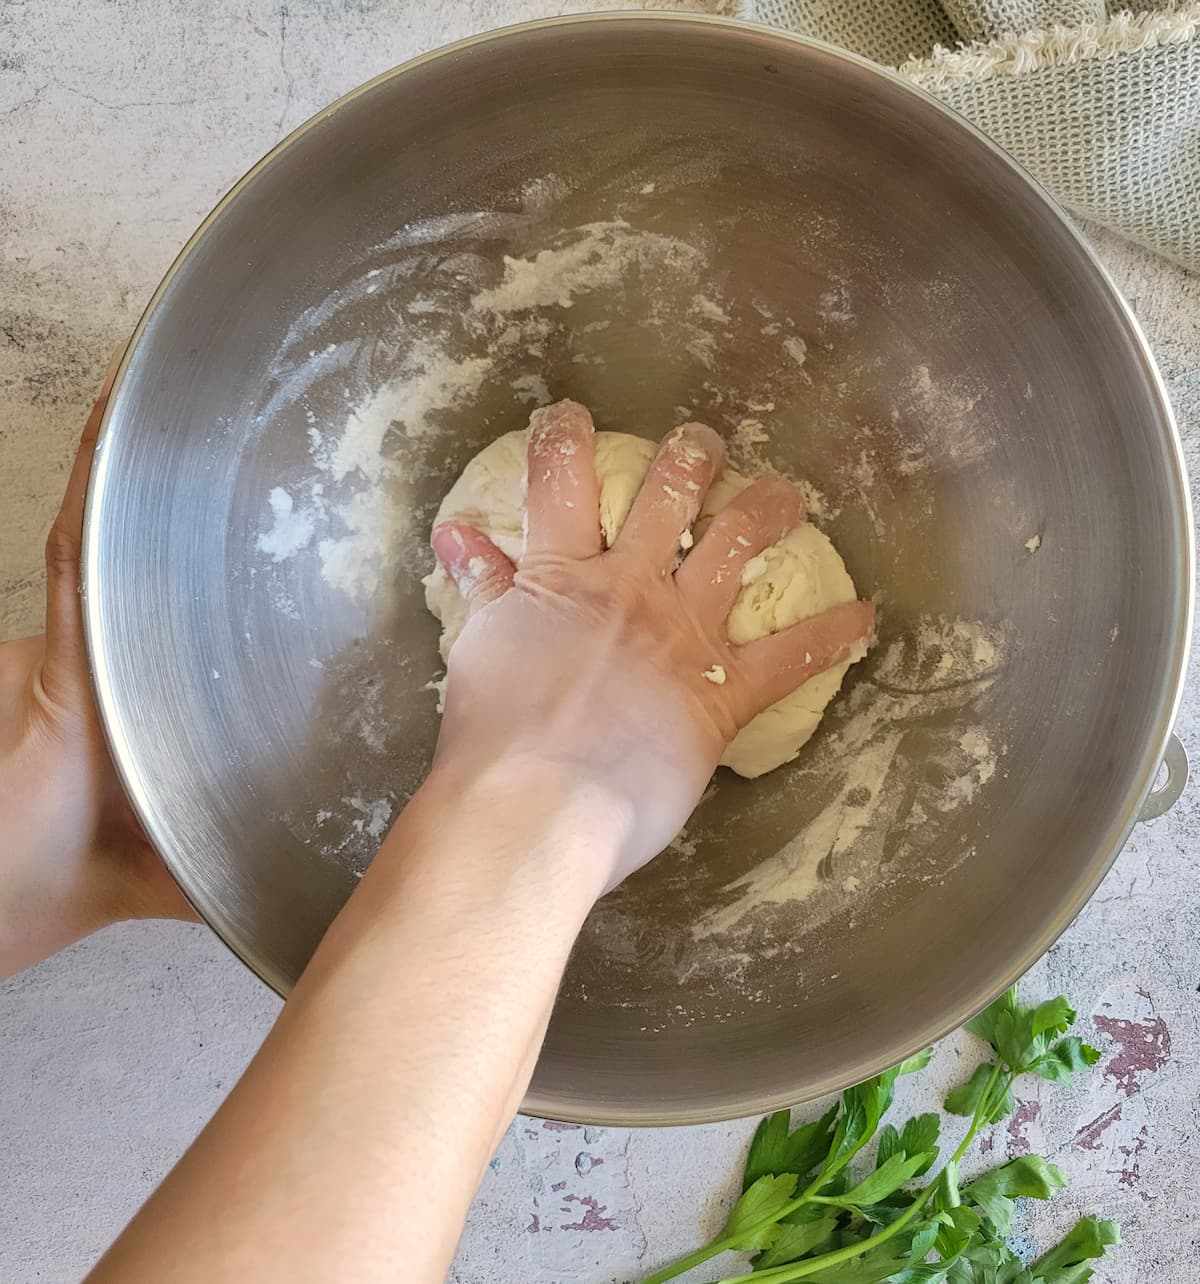 hand kneading a ball of dough in a bowl